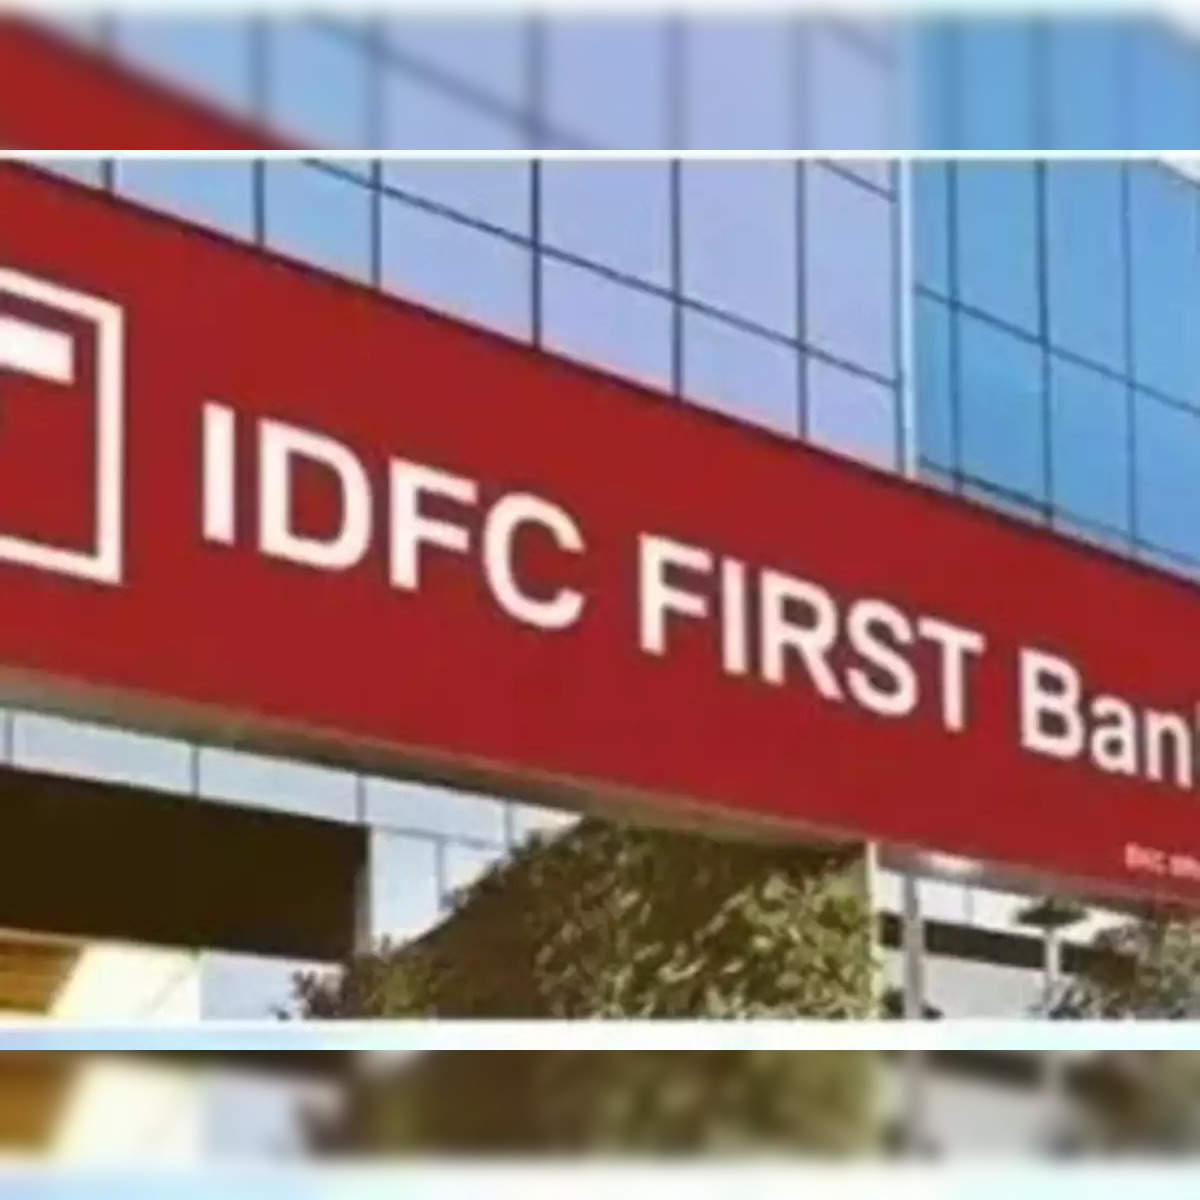 IDFC First Bank - Sustainable Growth